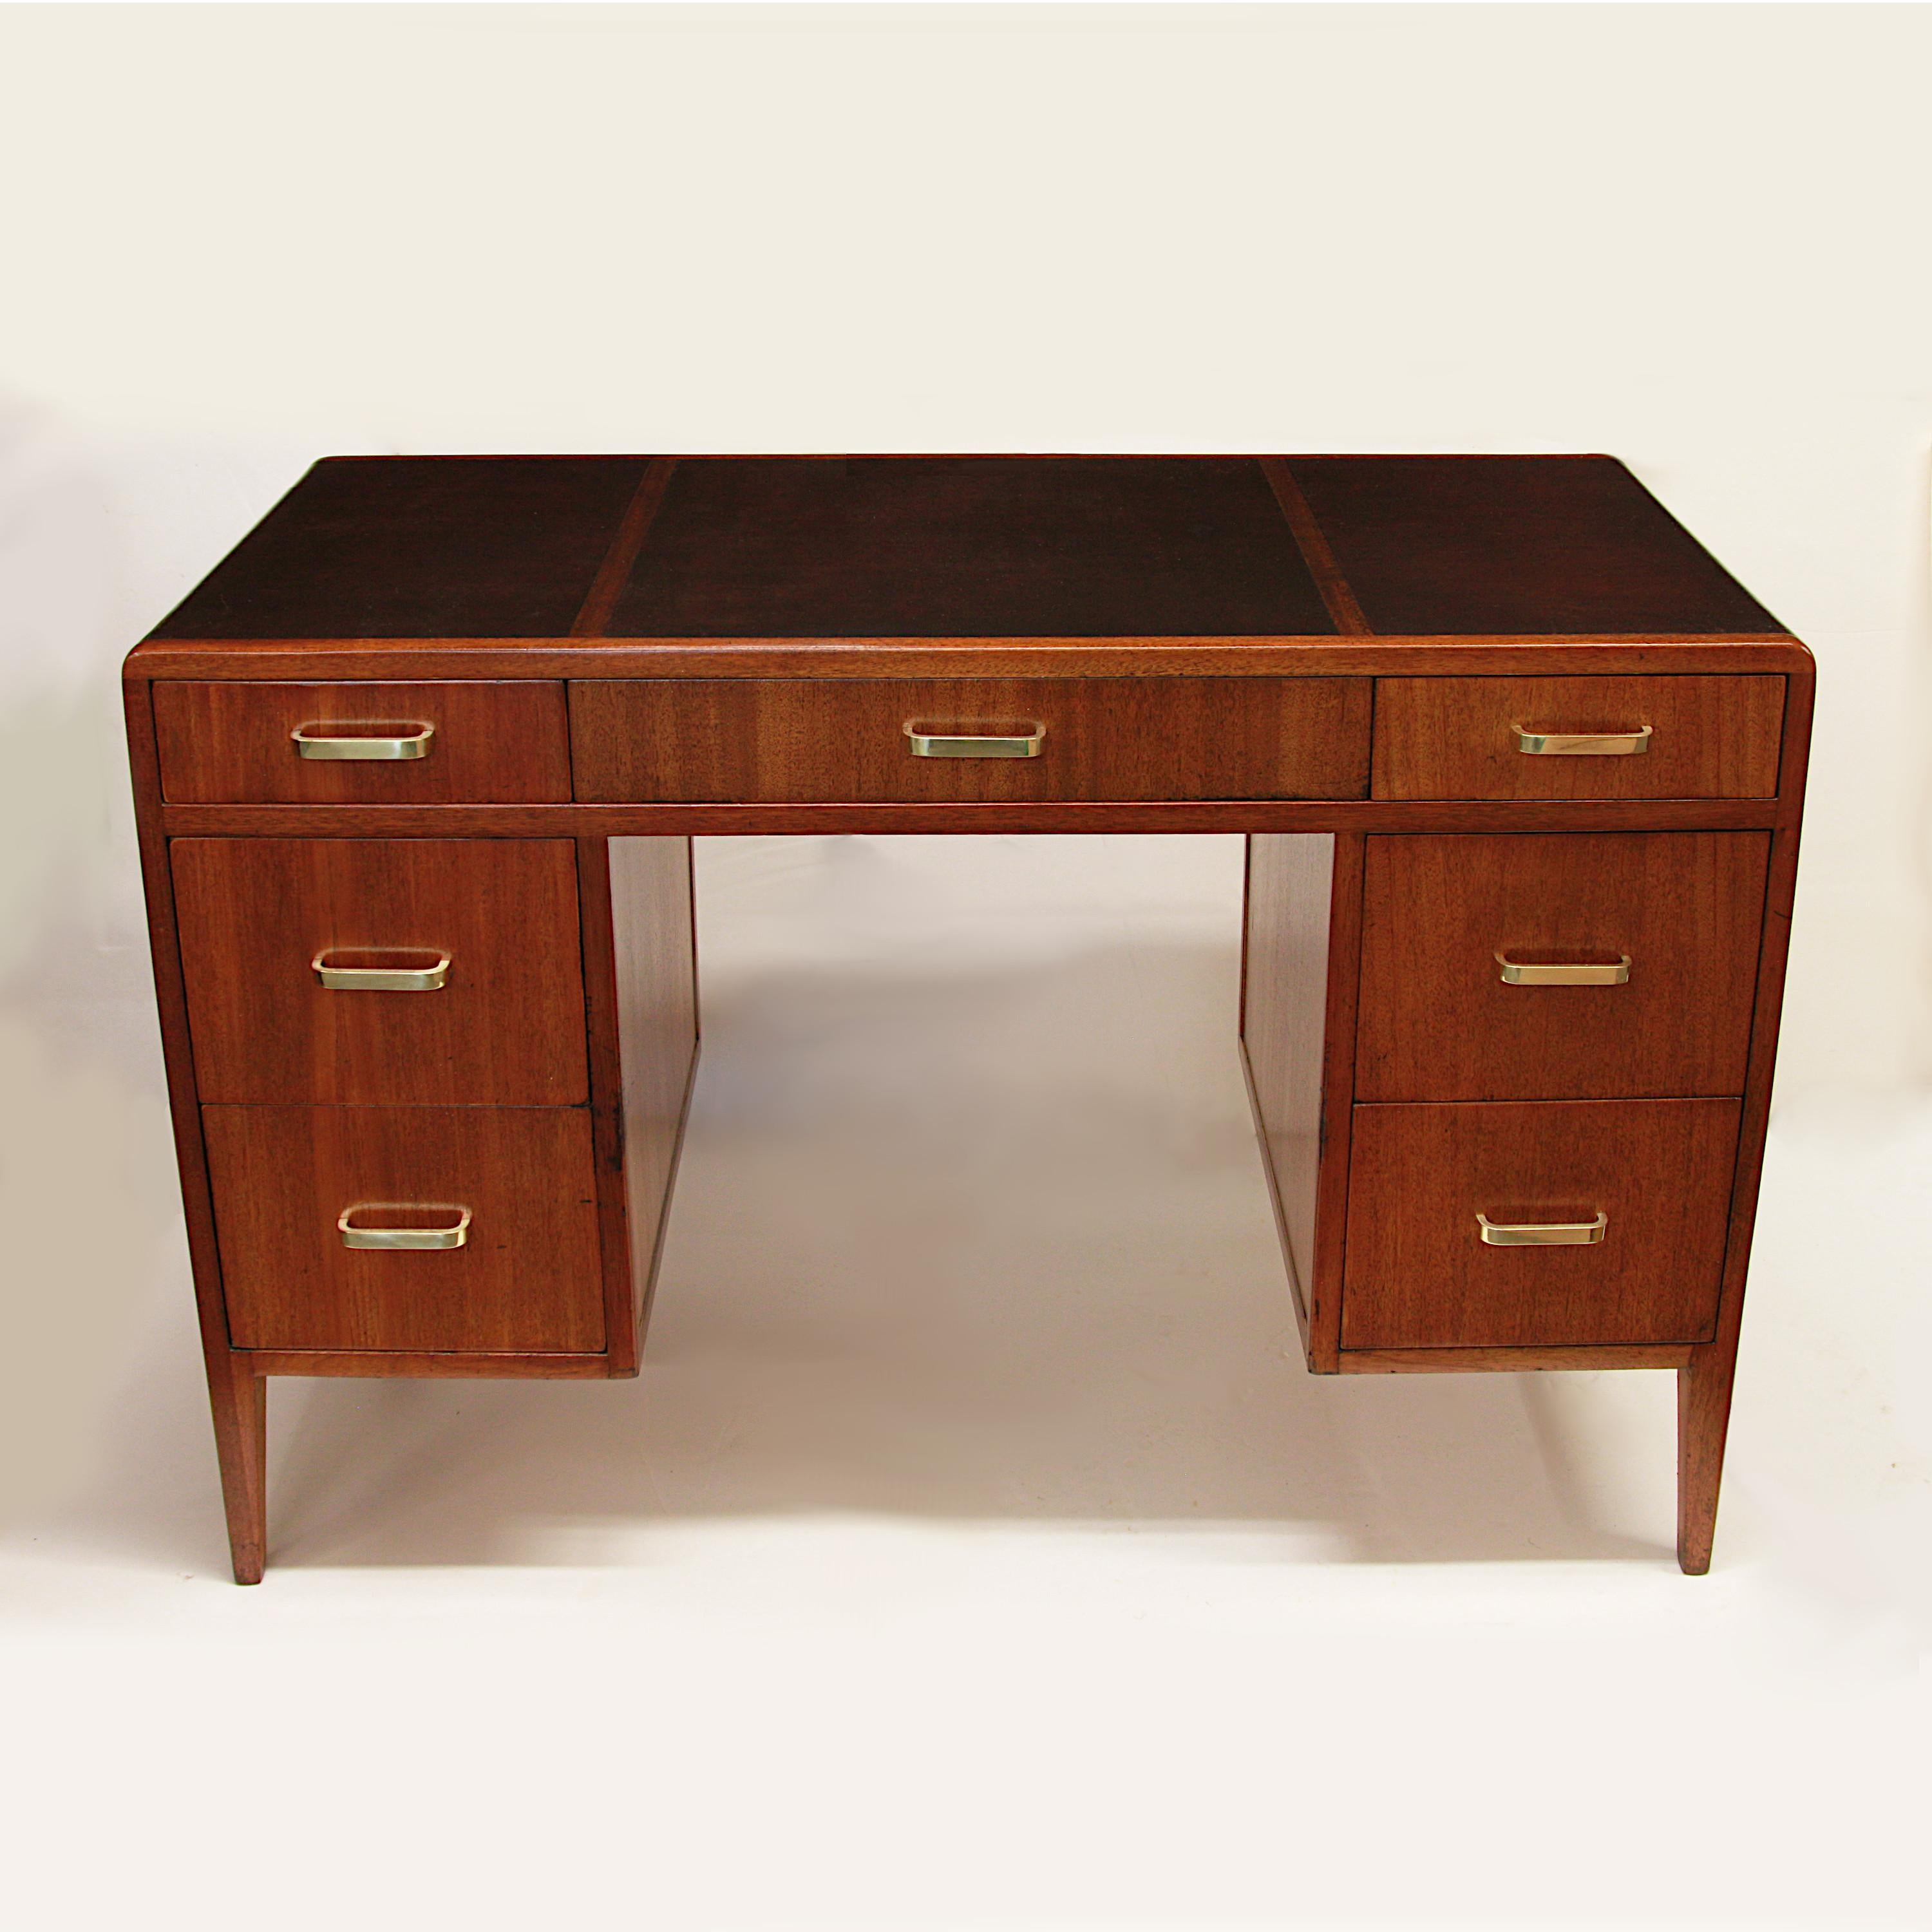 North American Mid-Century Modern Kneehole Leather-Top Desk by Edward Wormley for Dunbar